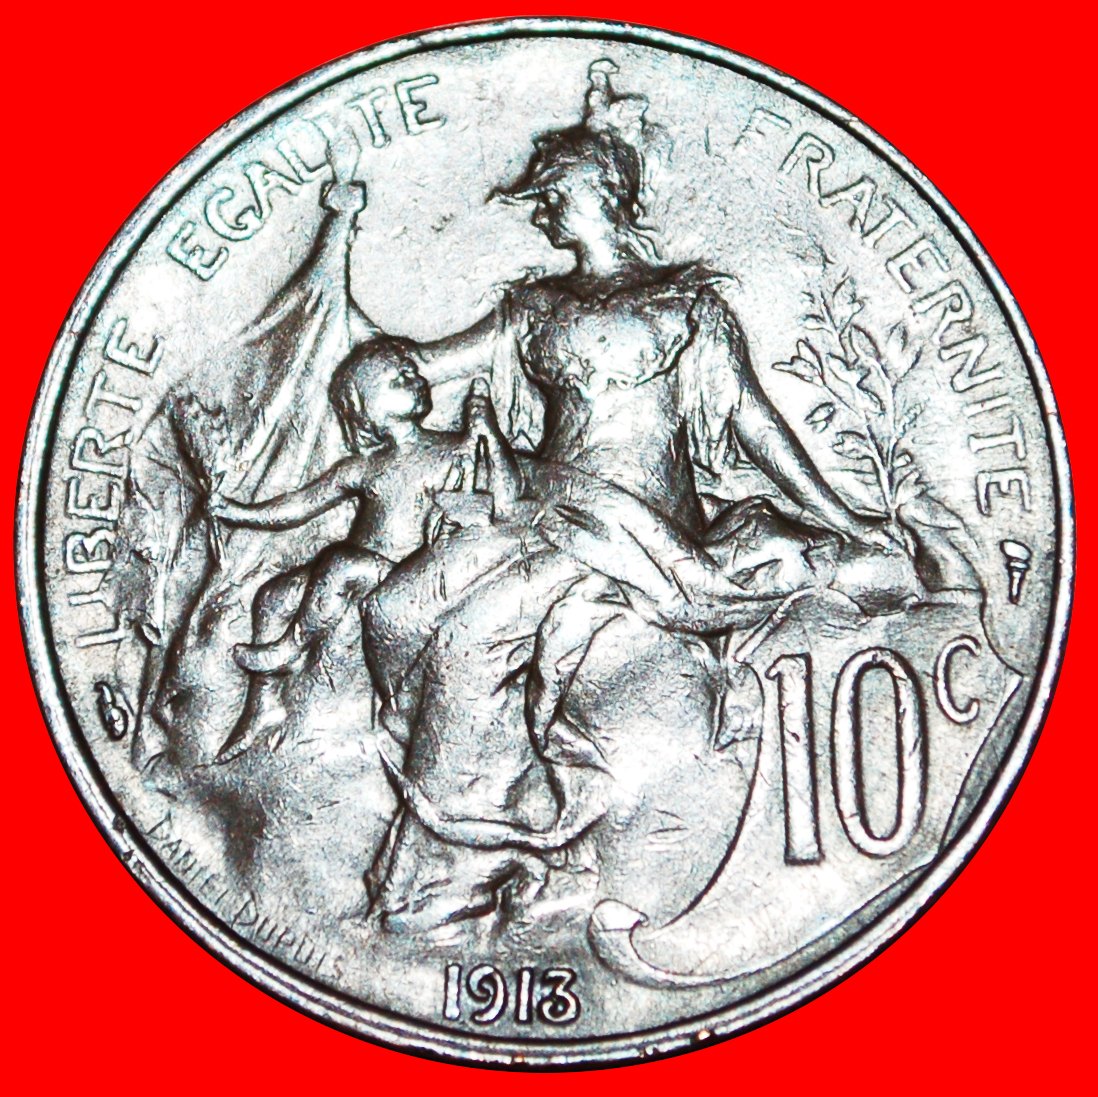  √ LIBERTY: FRANCE ★ 10 CENTIMES 1913! LOW START ★ NO RESERVE!!!   